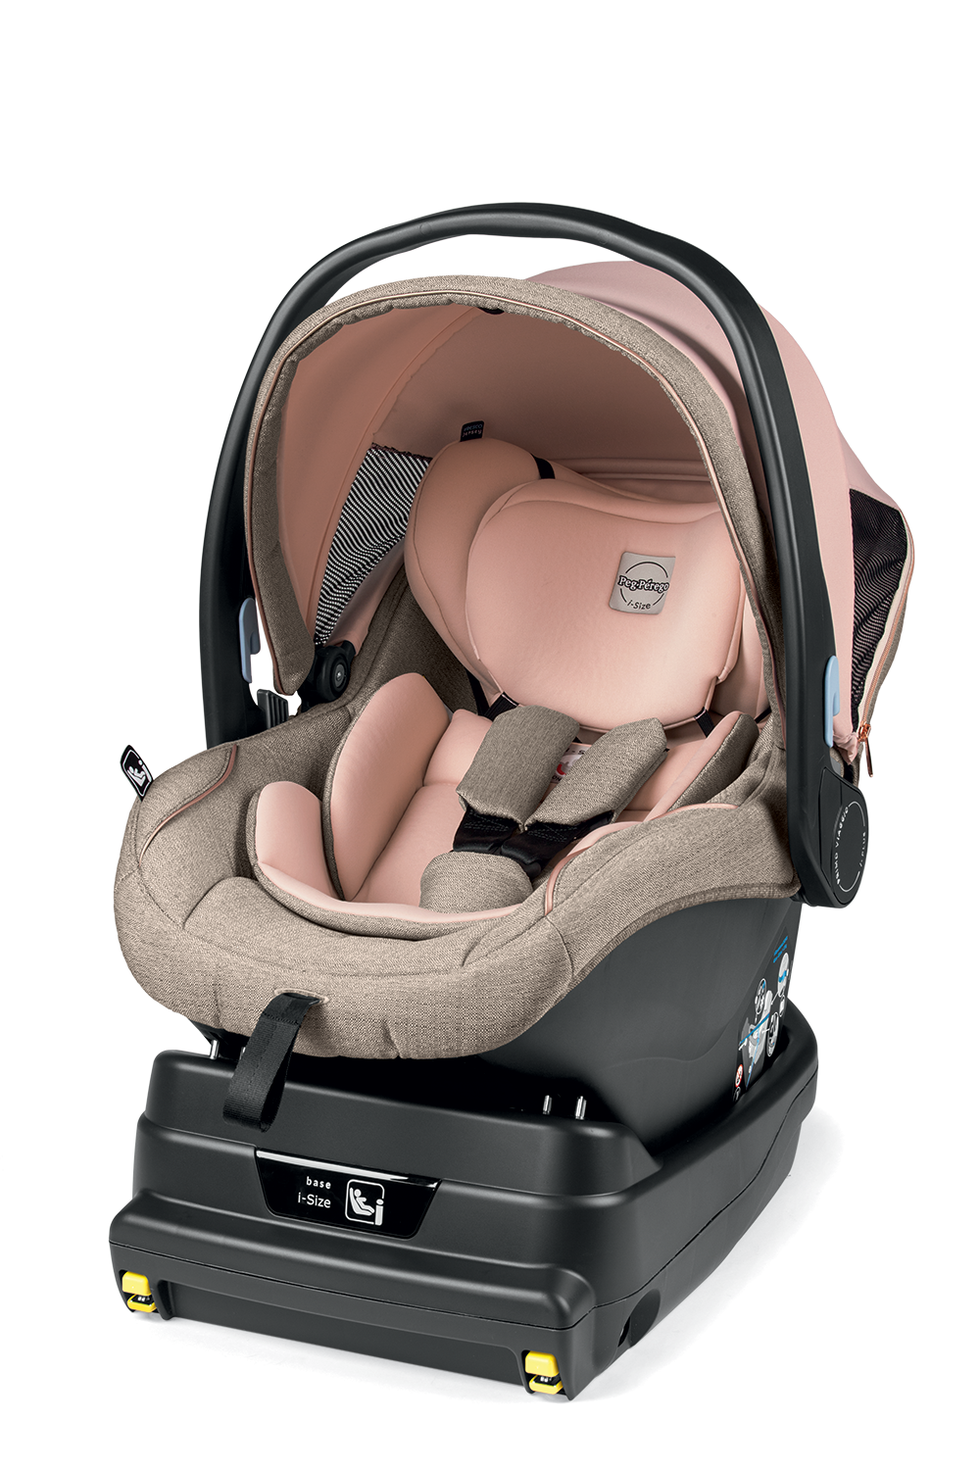 Product, Baby carriage, Beige, Brown, Comfort, Car seat, Baby, 